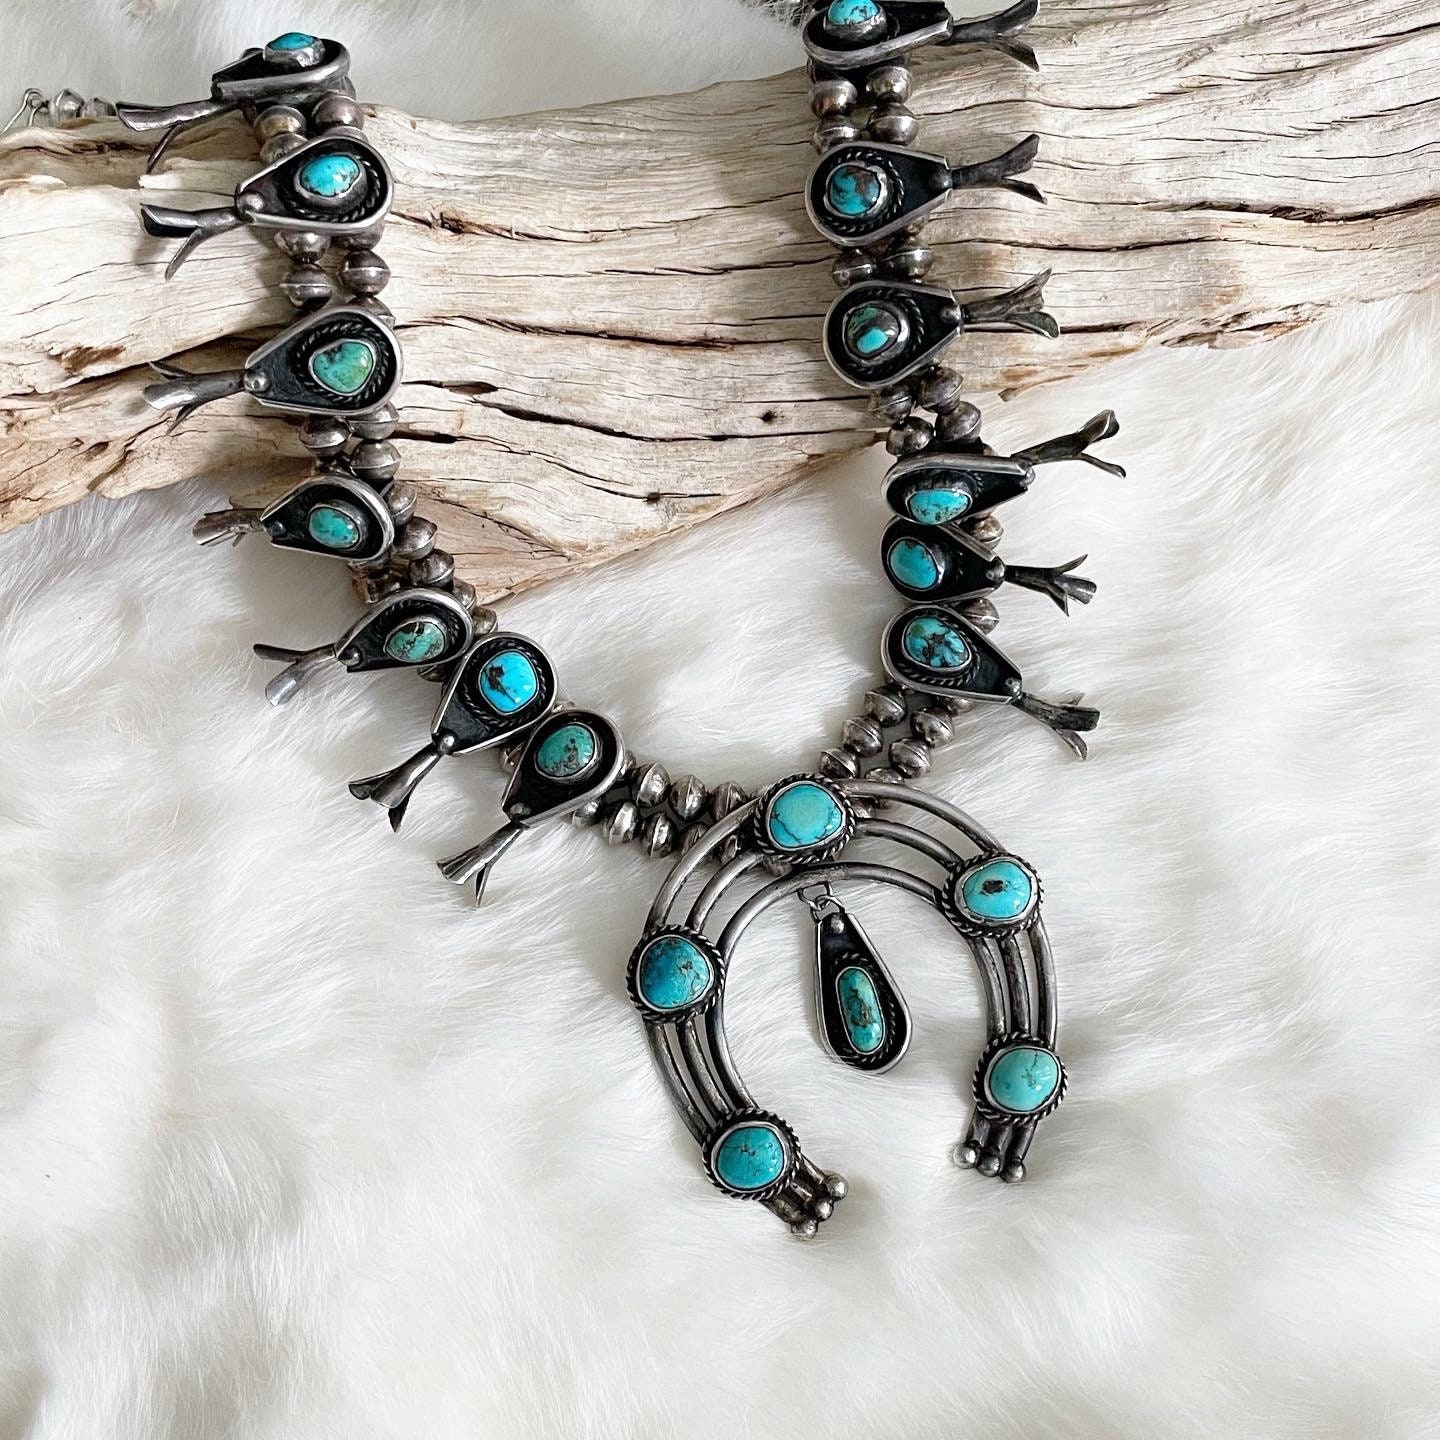 Amazon.com: Emulily Wesetern Squash Blossom Statement Necklace and Earrings  Set Western Navajo (Turquoise): Clothing, Shoes & Jewelry